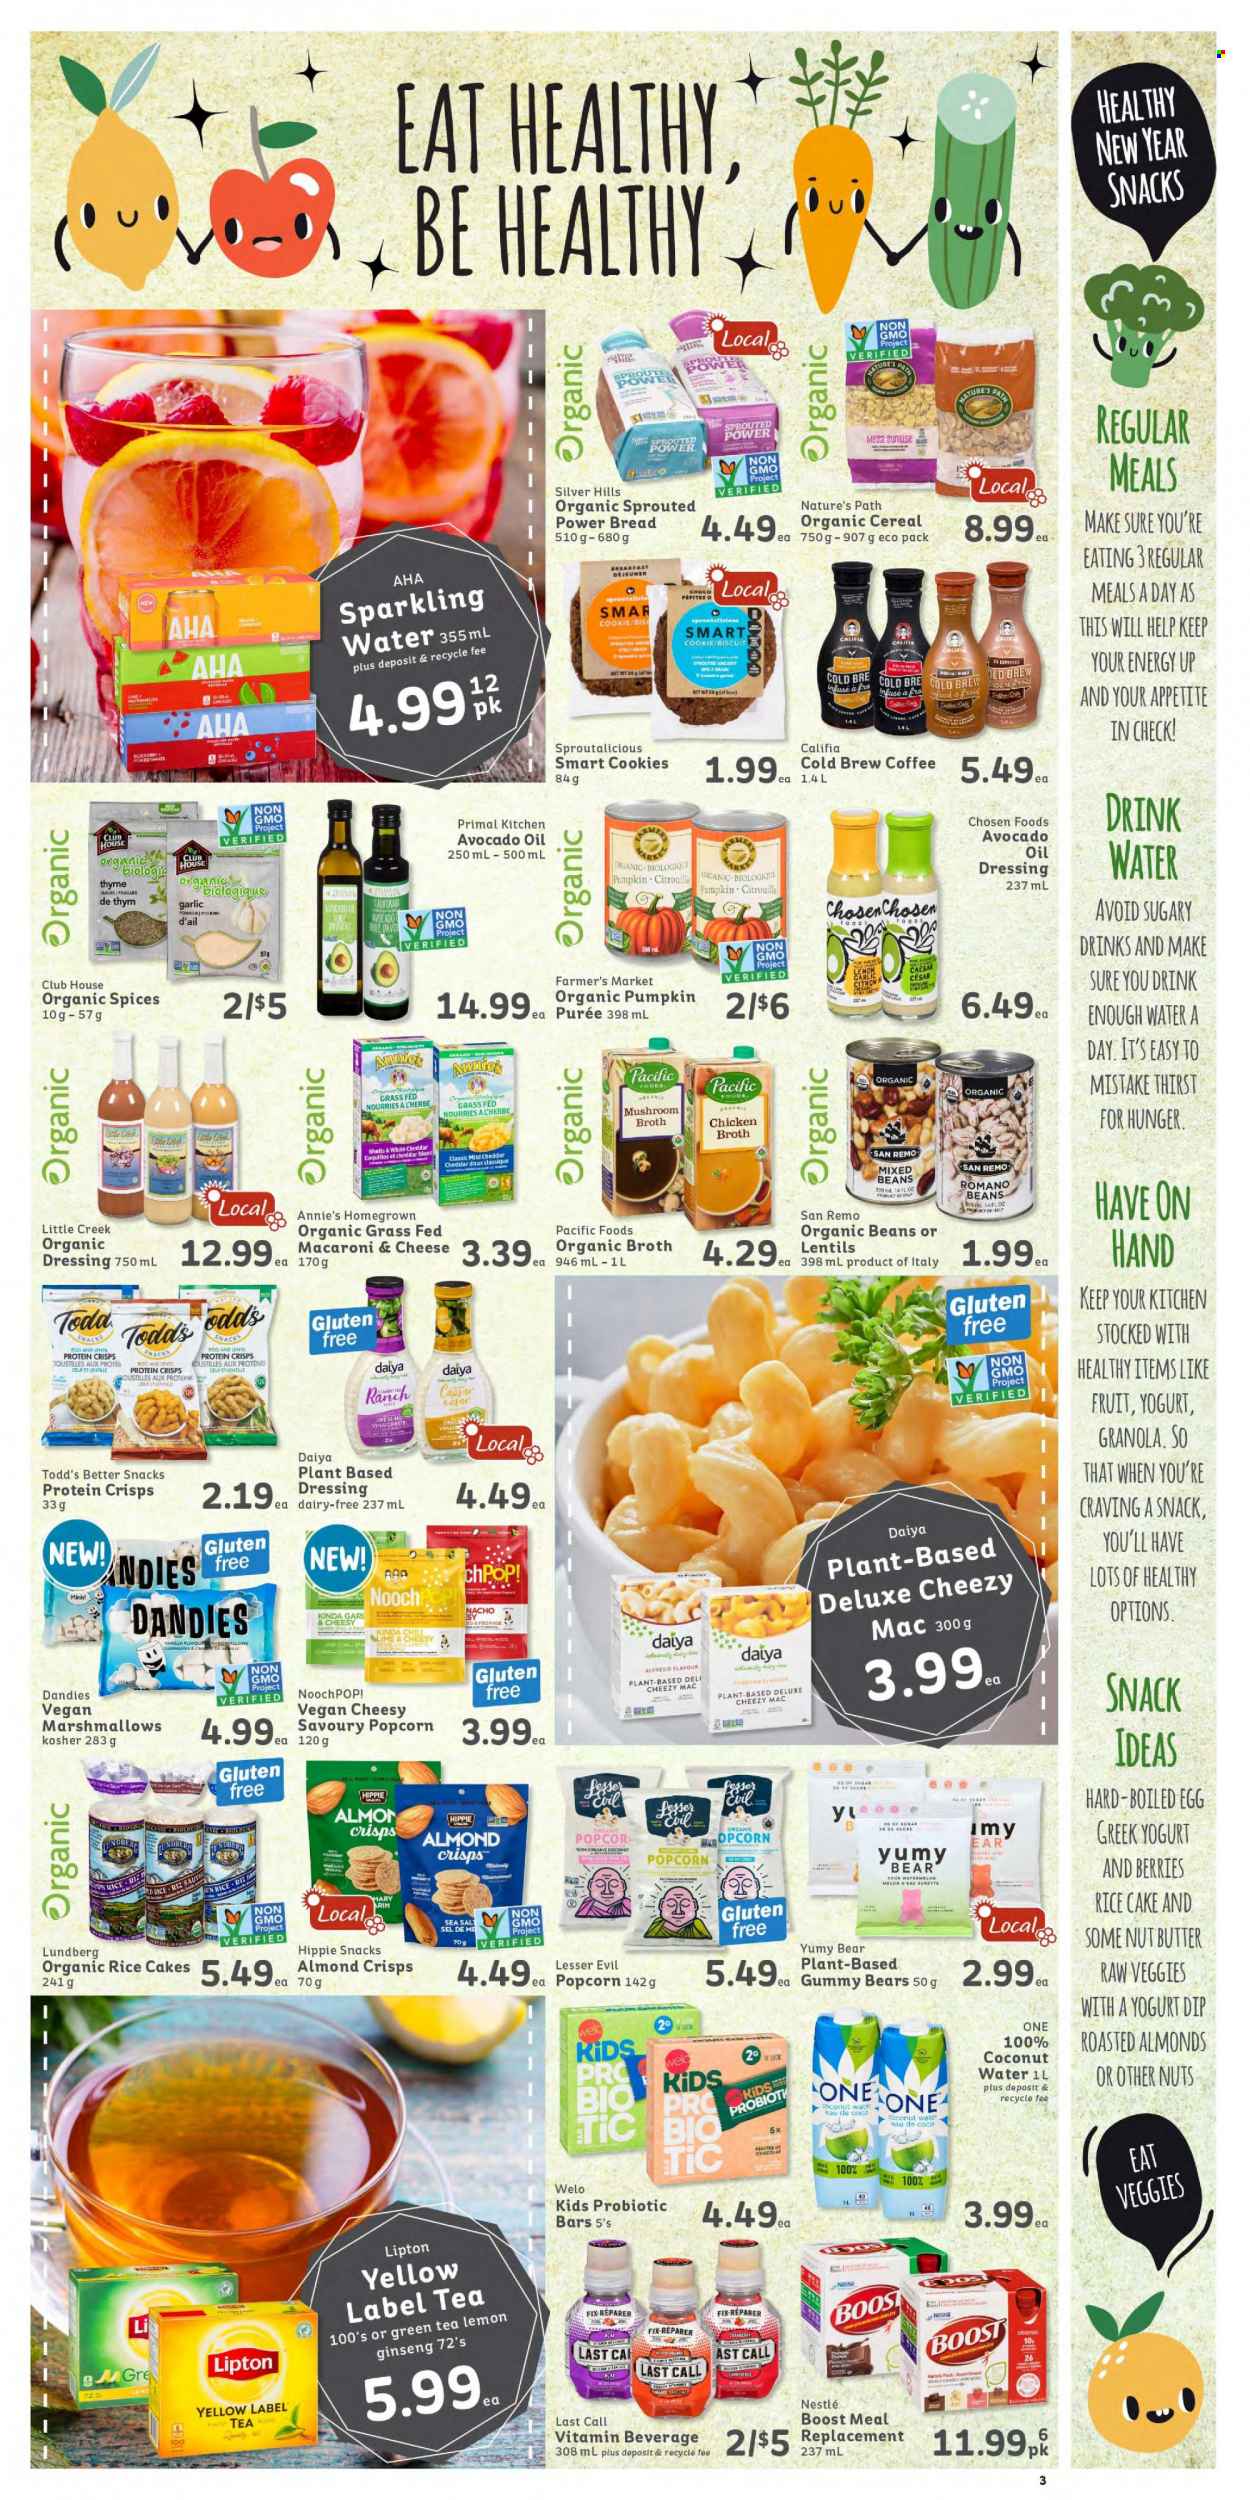 thumbnail - IGA Simple Goodness Flyer - January 07, 2022 - January 13, 2022 - Sales products - bread, pie, garlic, pumpkin, watermelon, melons, pomegranate, macaroni & cheese, Annie's, Rana, mild cheddar, greek yoghurt, yoghurt, eggs, dip, cookies, marshmallows, snack, biscuit, popcorn, sugar, chicken broth, sea salt, broth, lentils, cereals, rice, dressing, avocado oil, oil, nut butter, almonds, coconut water, sparkling water, Boost, green tea, coffee, Nestlé, granola, Lipton. Page 3.